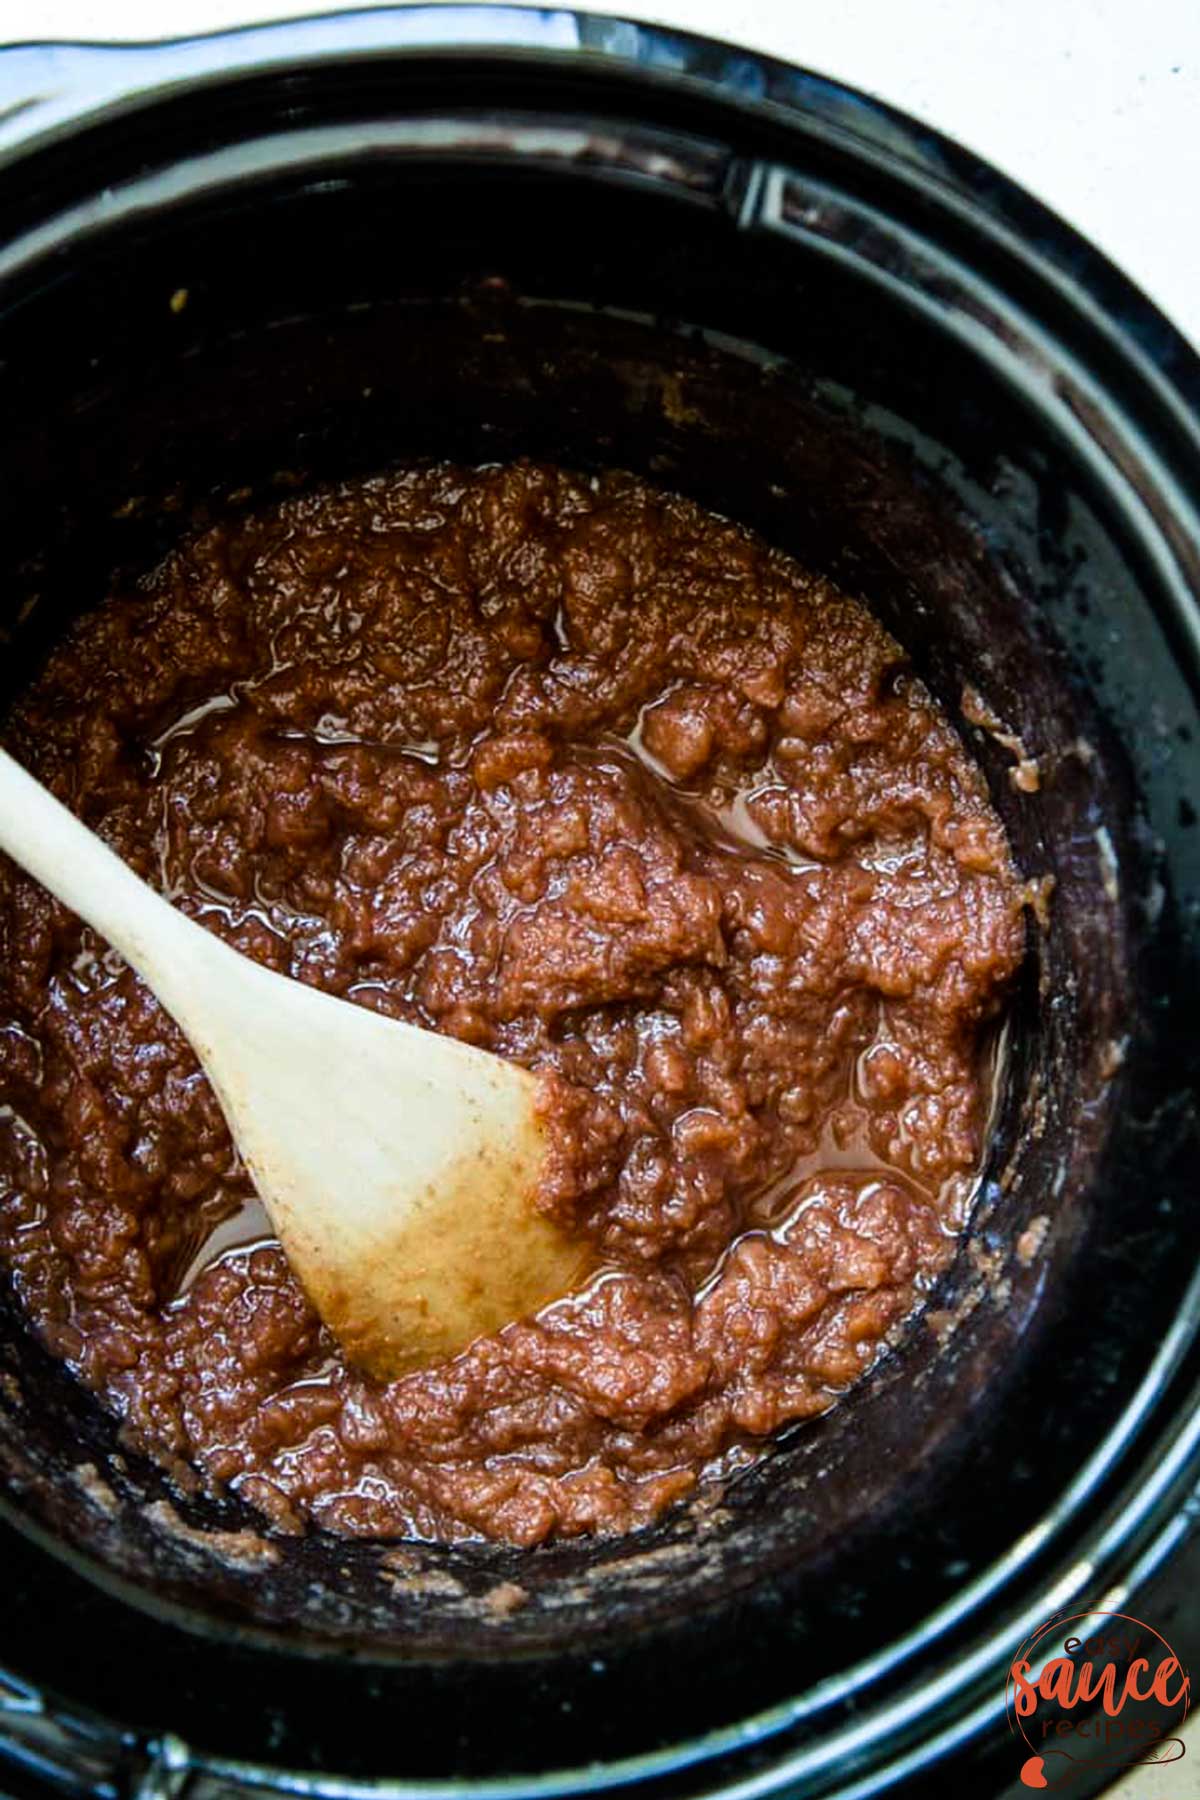 Chunky applesauce in the slow cooker